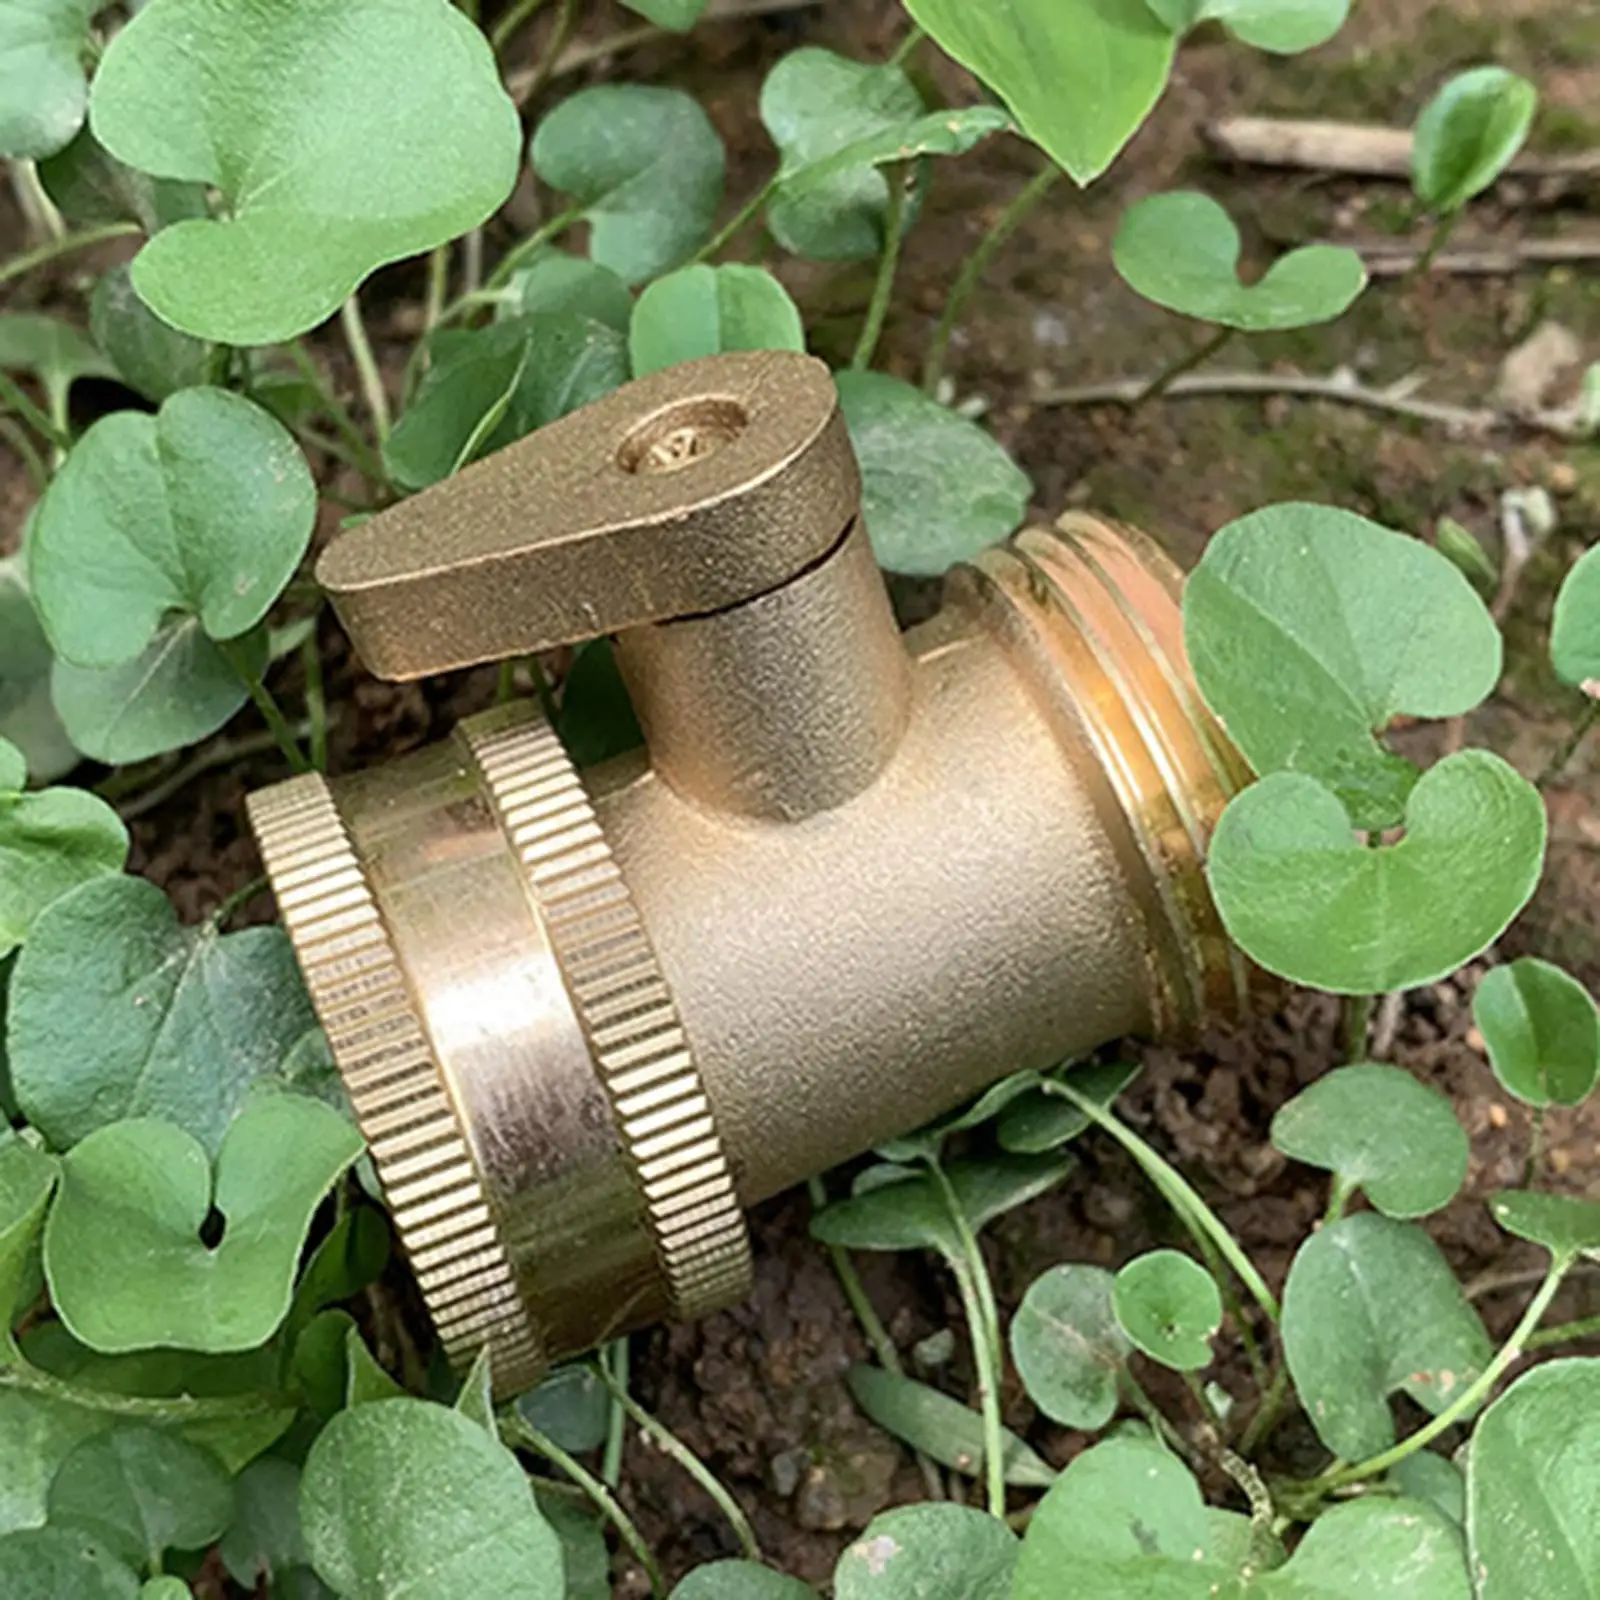 Brass Garden Hose Adapter Watering Connector Connection Tube Fittings Replacements Gardening Accessories for Outdoor Garden Lawn